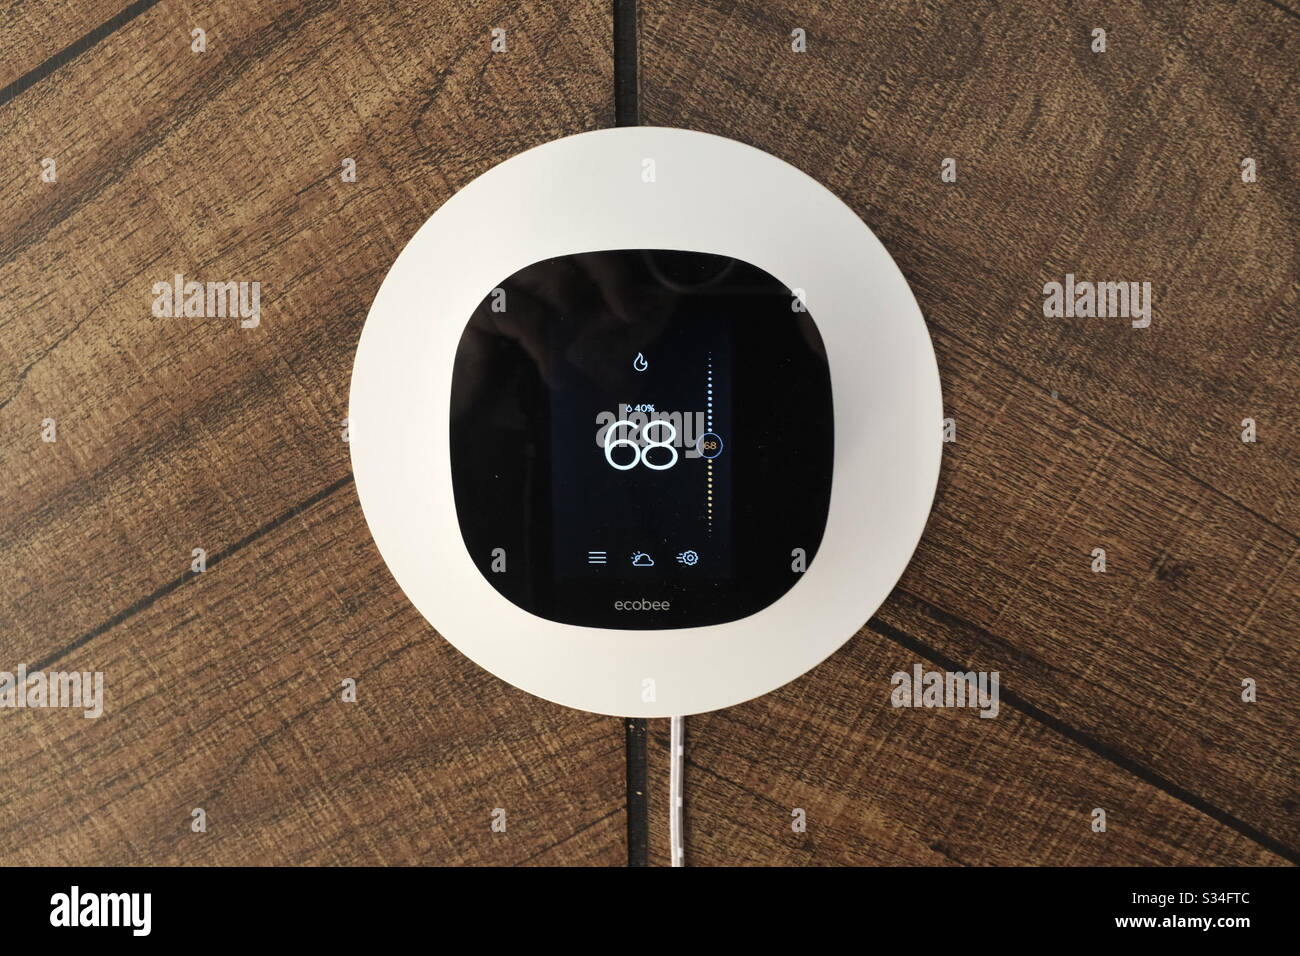 Ecobee remote programmable thermostats Stock Photo